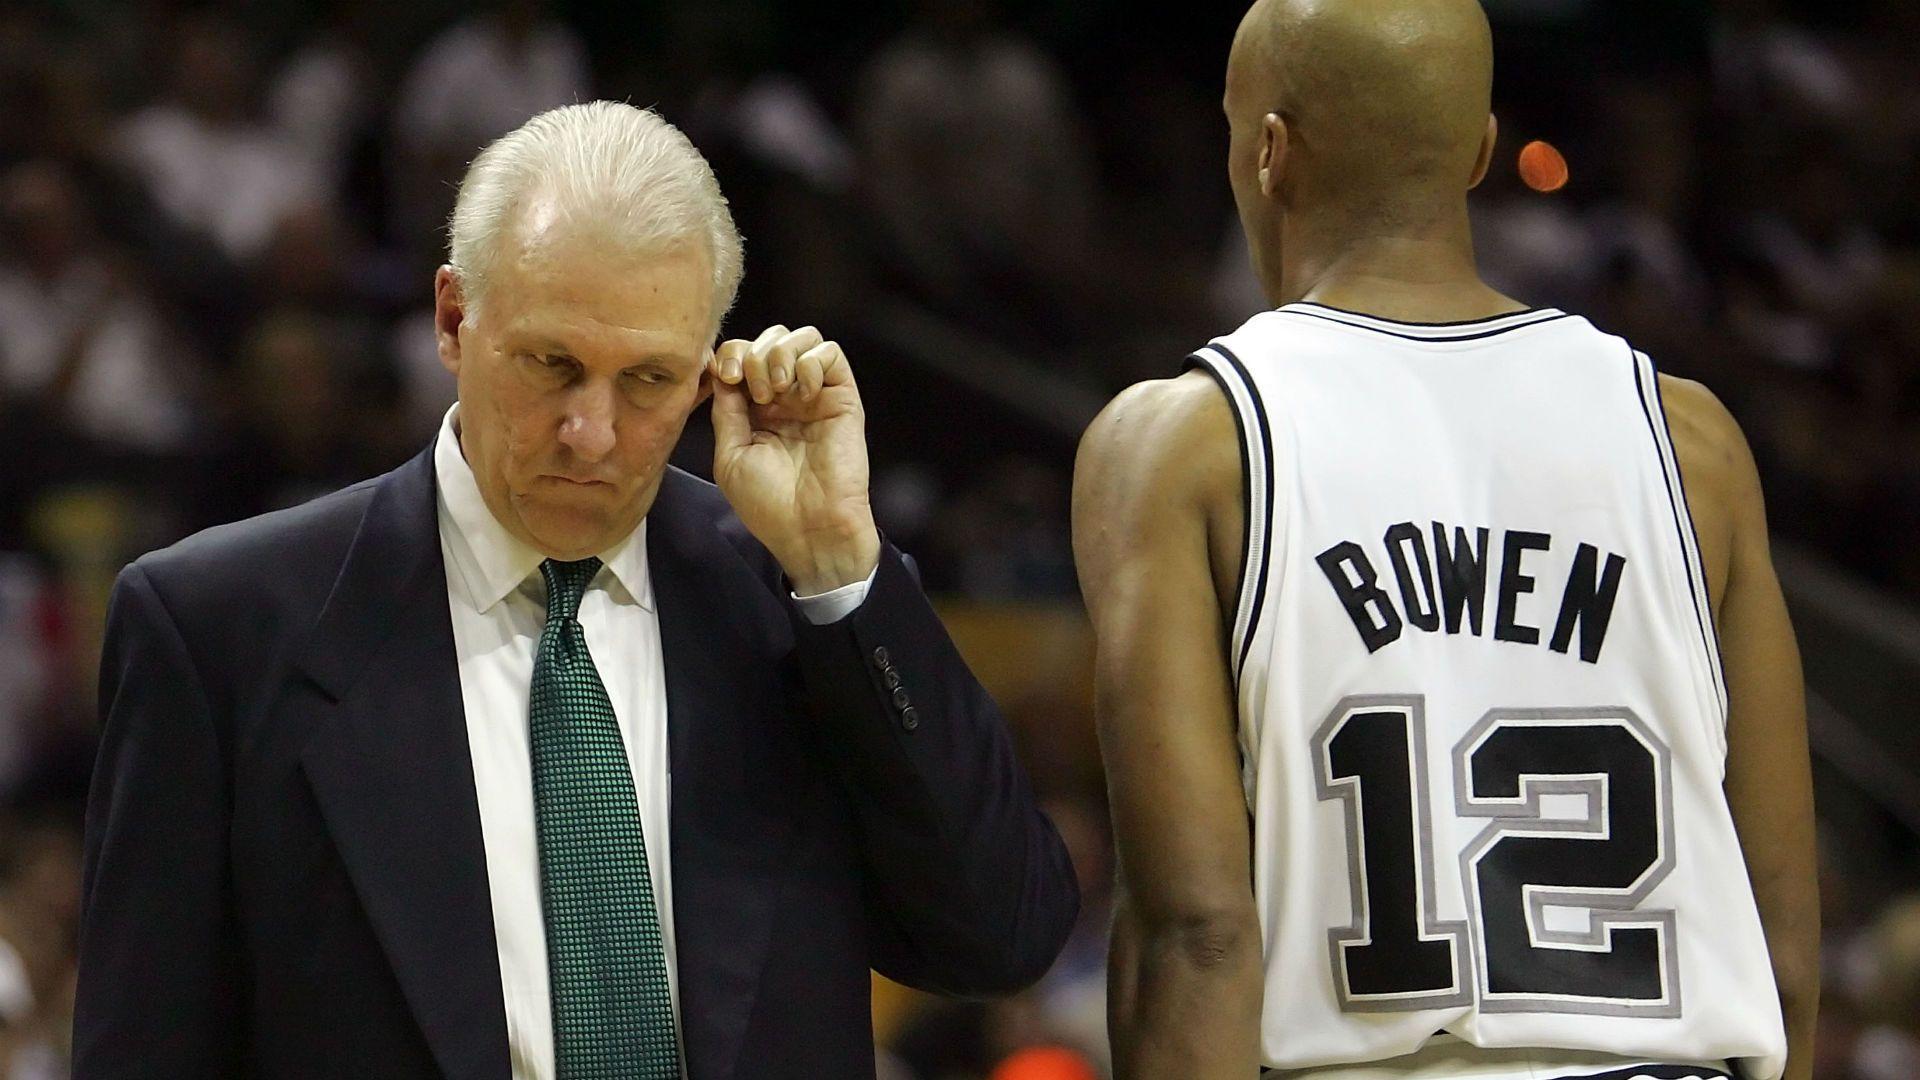 Gregg Popovich's old comments on Bruce Bowen don't make him wrong